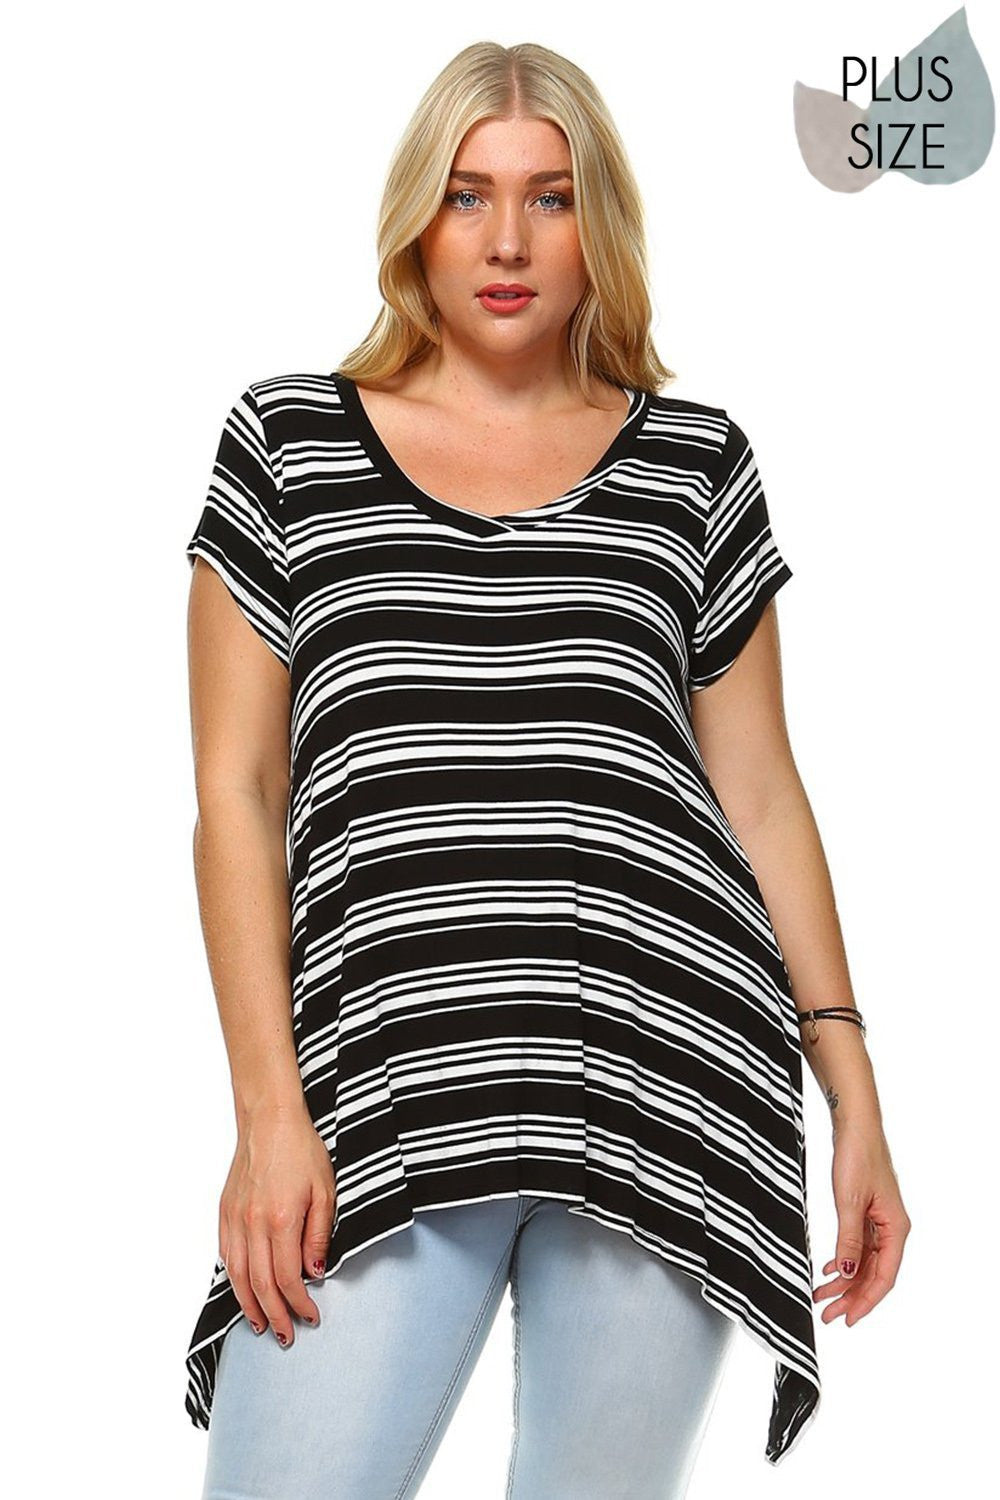 beautiful woman an Urban X Plus Size Striped V neck capped sleeve shark bite top Perfect for Spring & Summer, Evening wear, Festival, Beach Day, Vacation, Dance, Poolside Parties